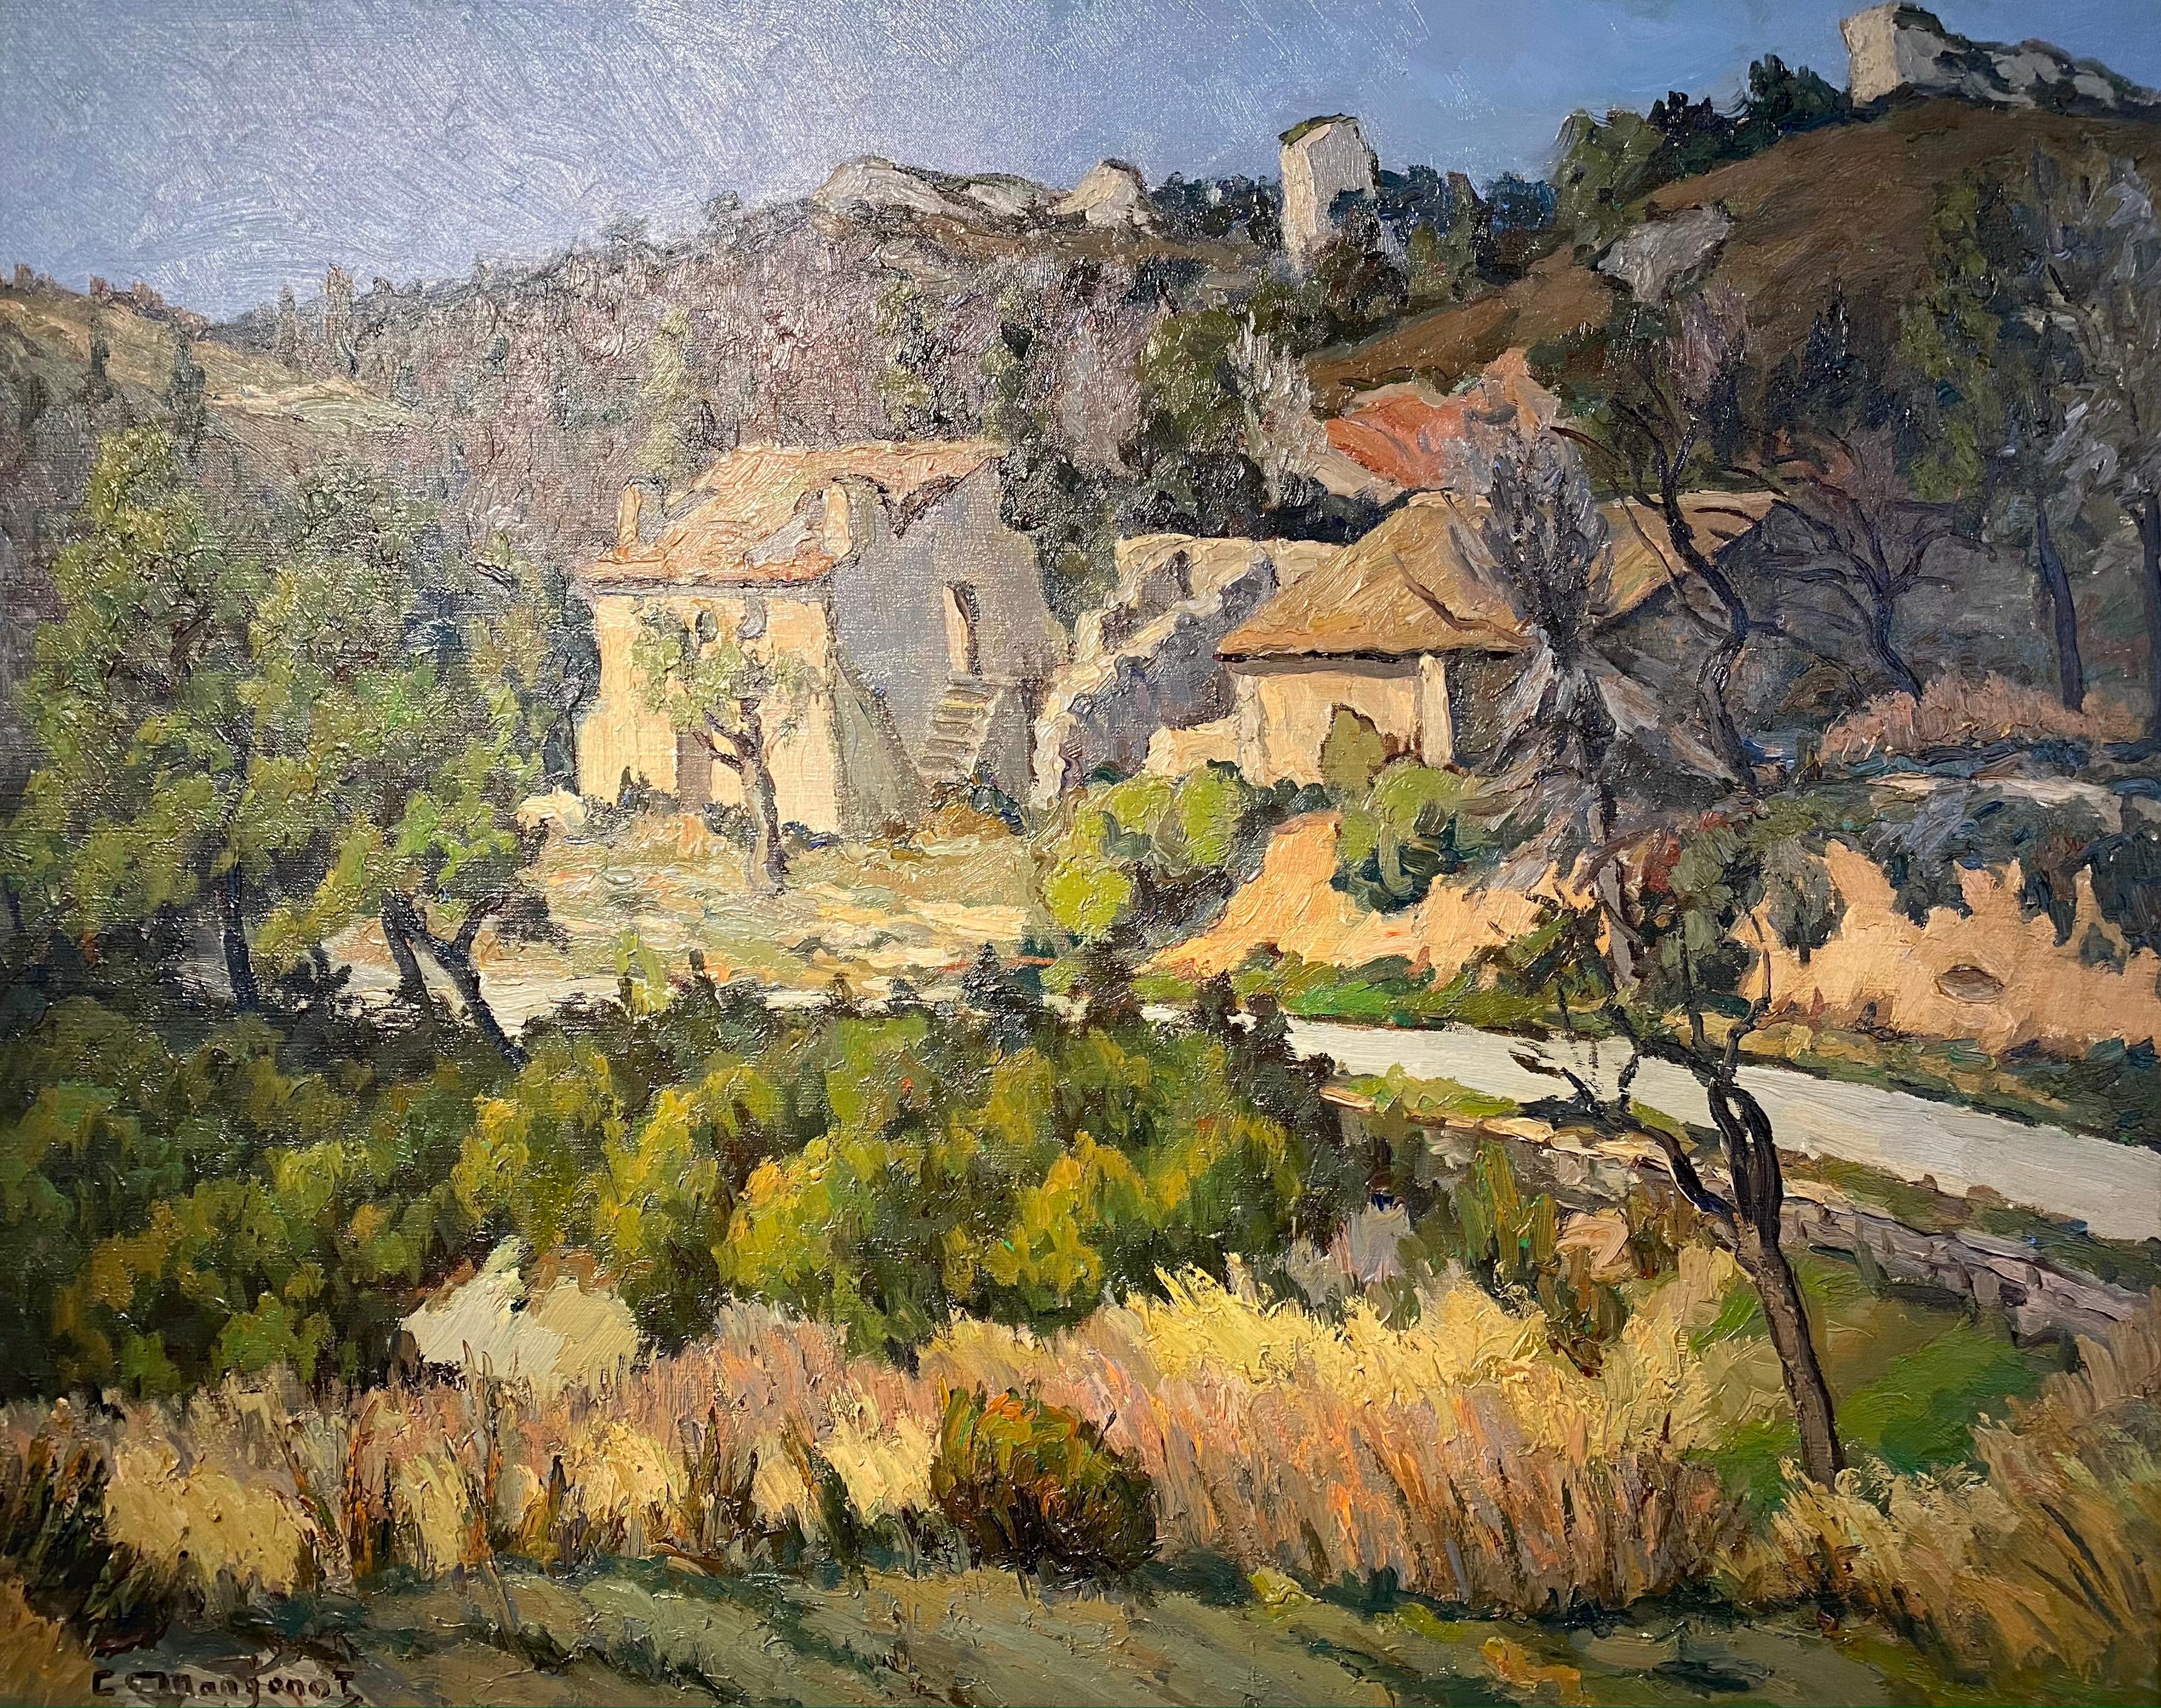 'Olive Groves' Rural French Landscape painting of trees, cottage & greenery  - Painting by Emile Mangenot